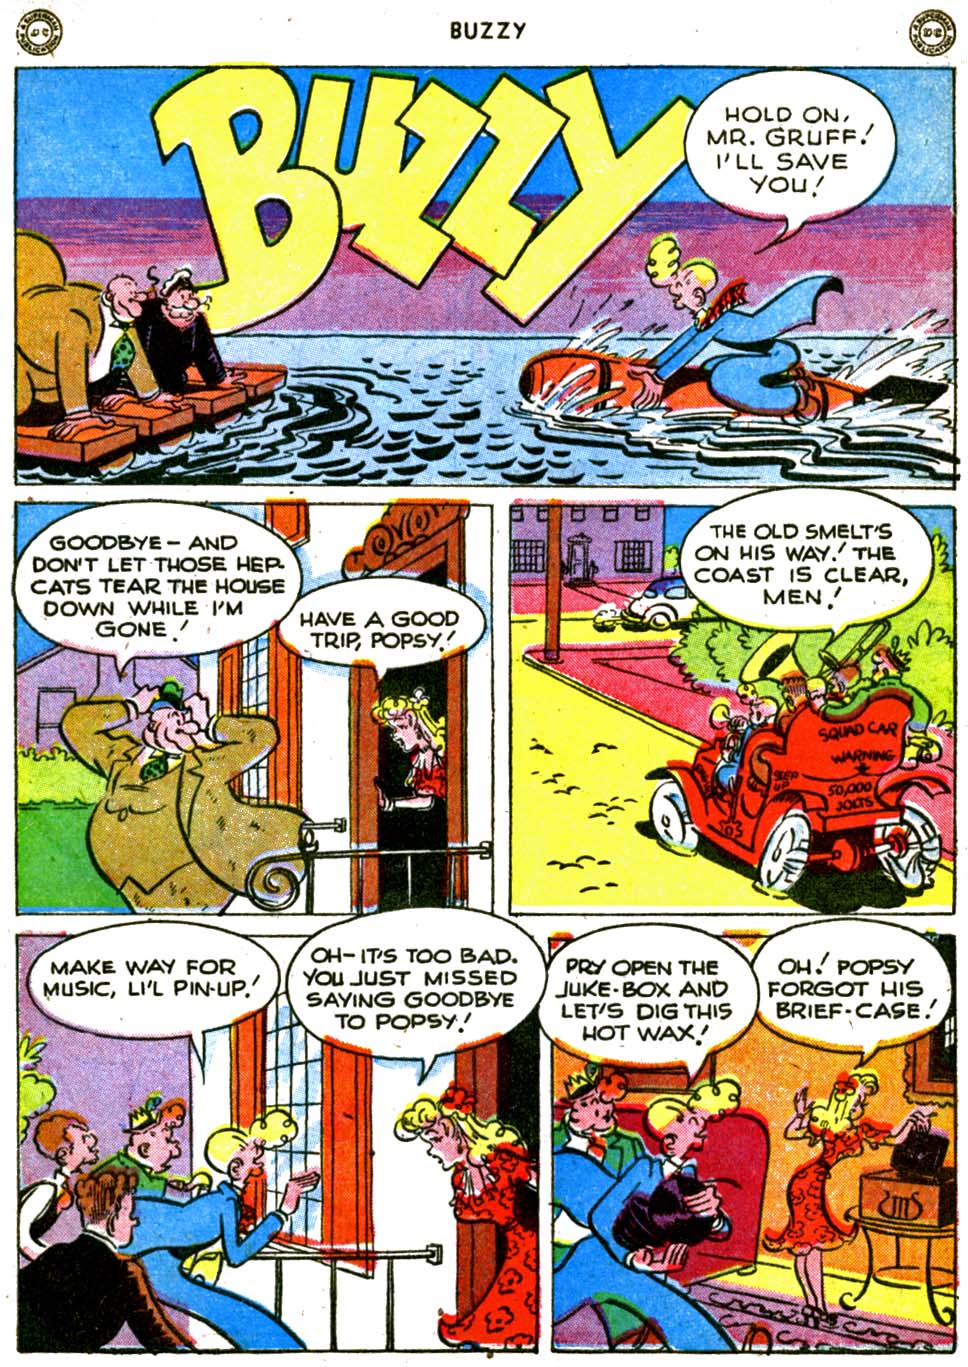 Read online Buzzy comic -  Issue #11 - 3